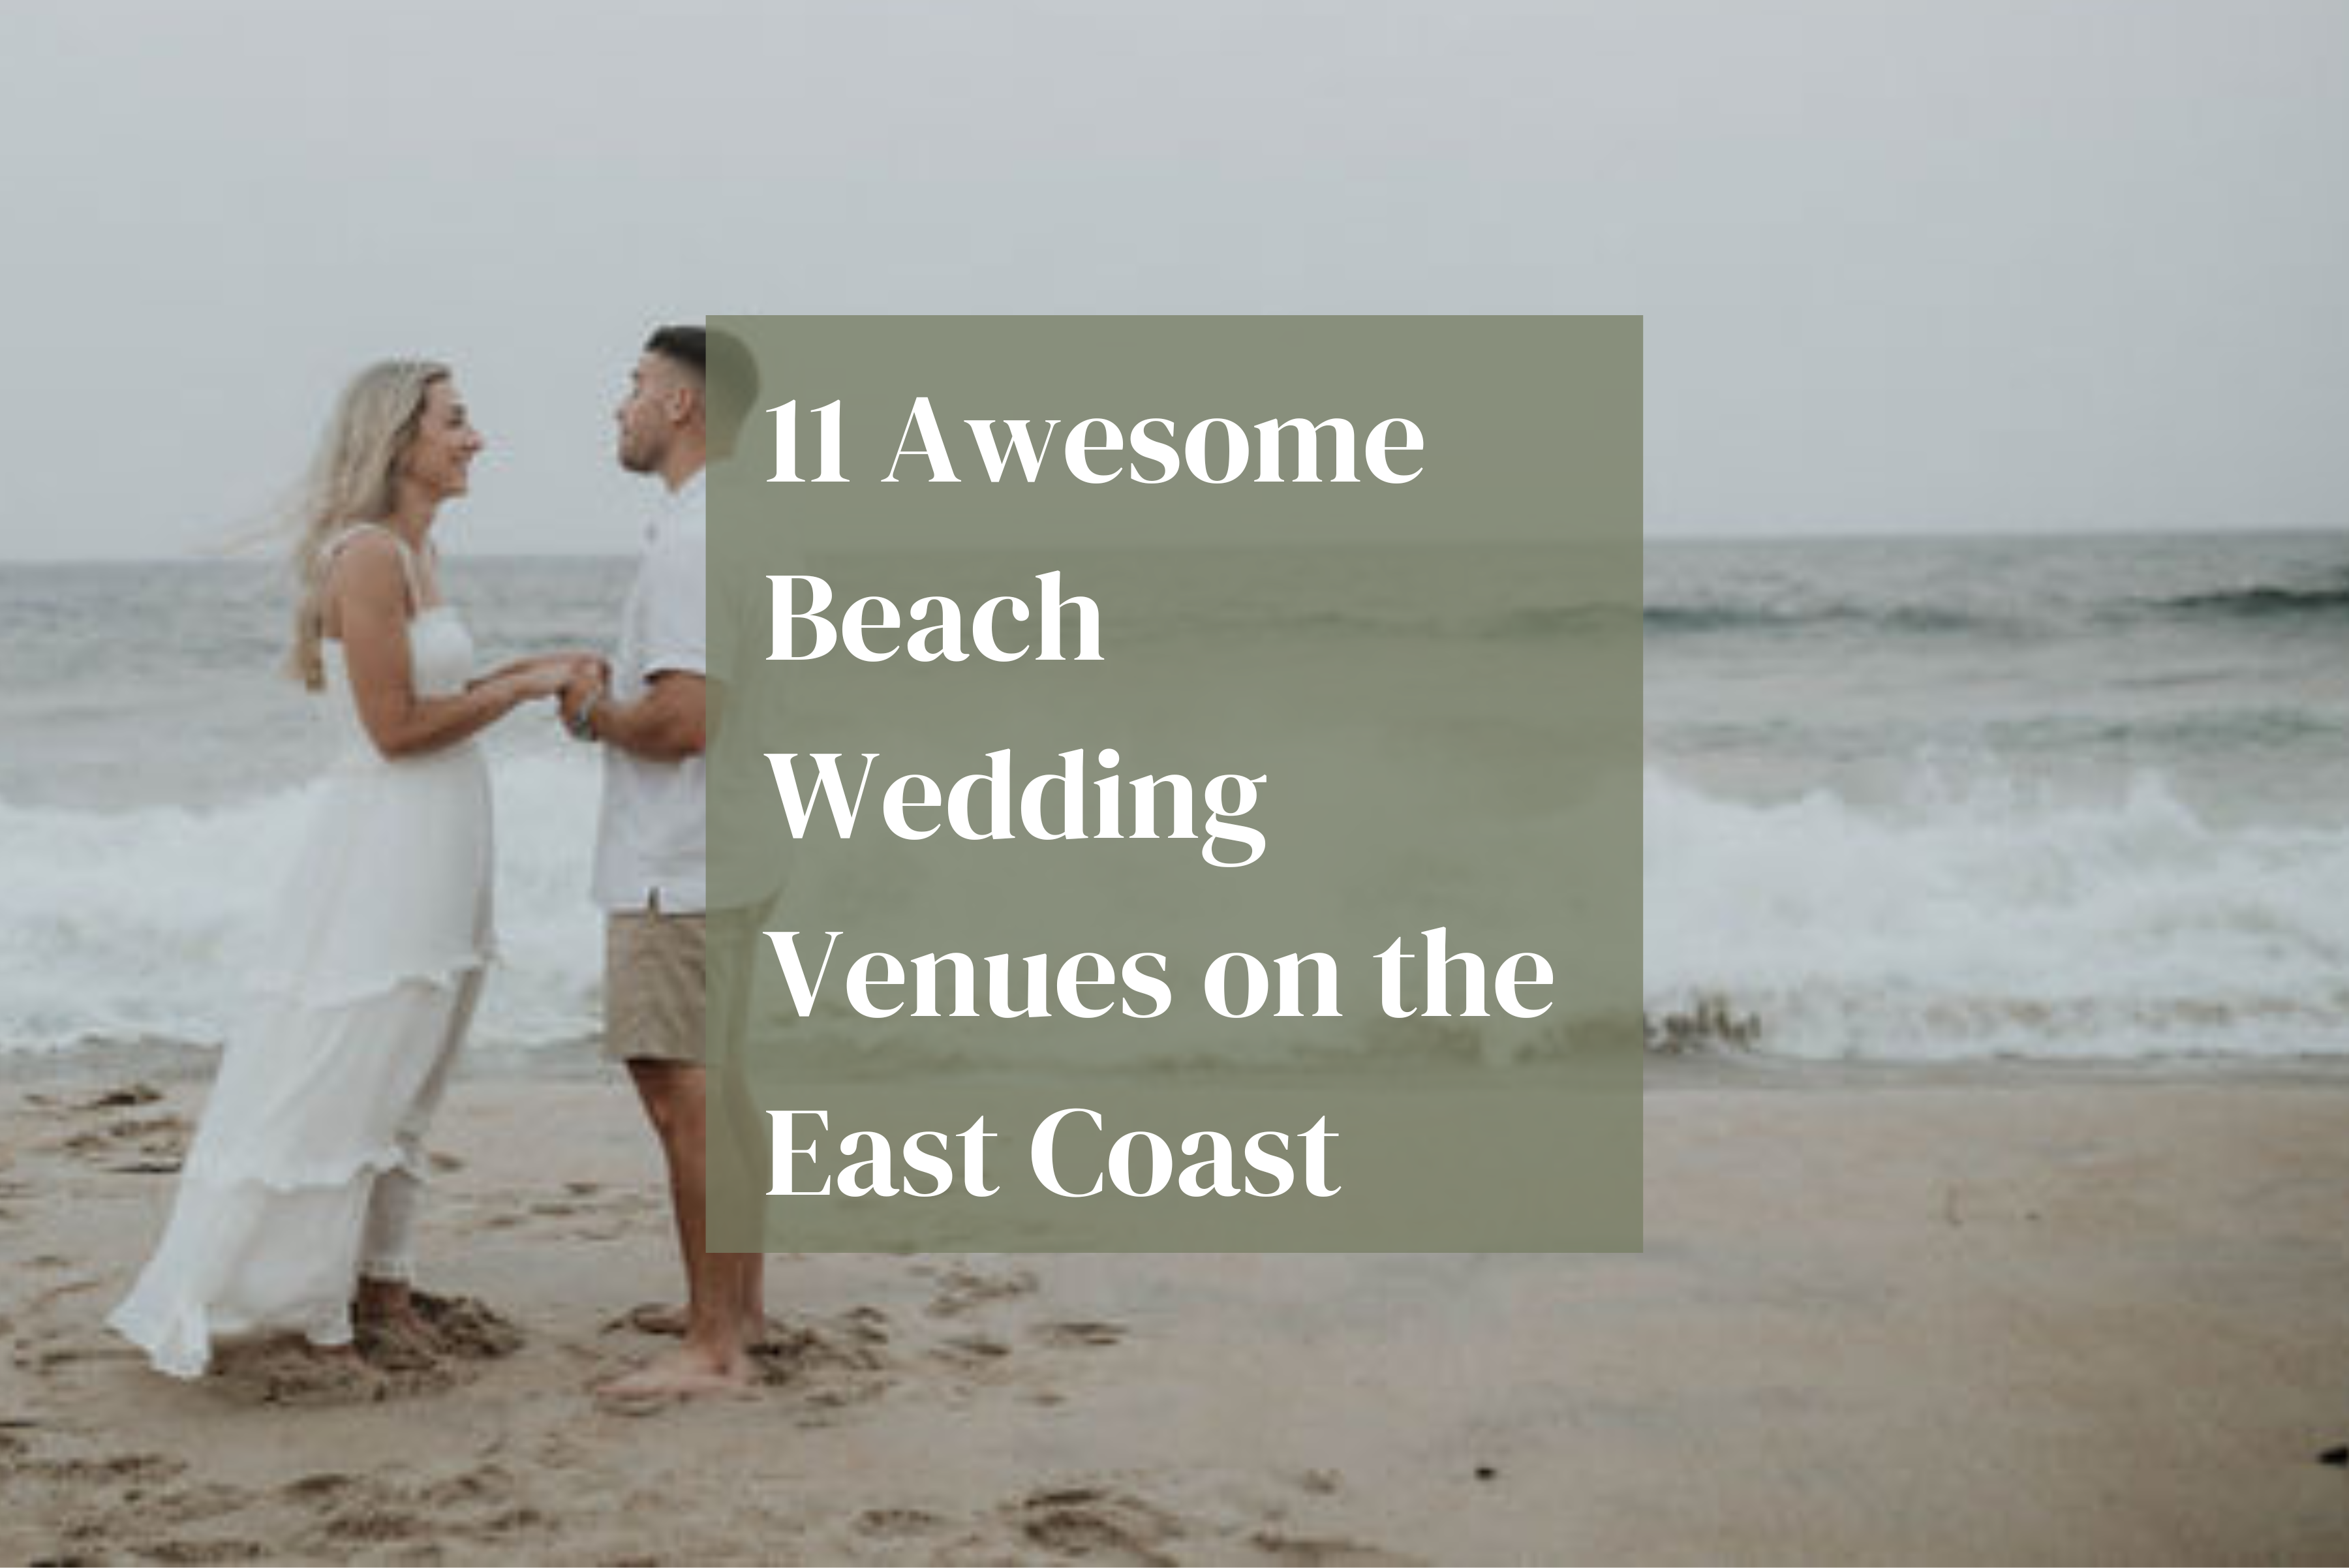 beach wedding venues feature image